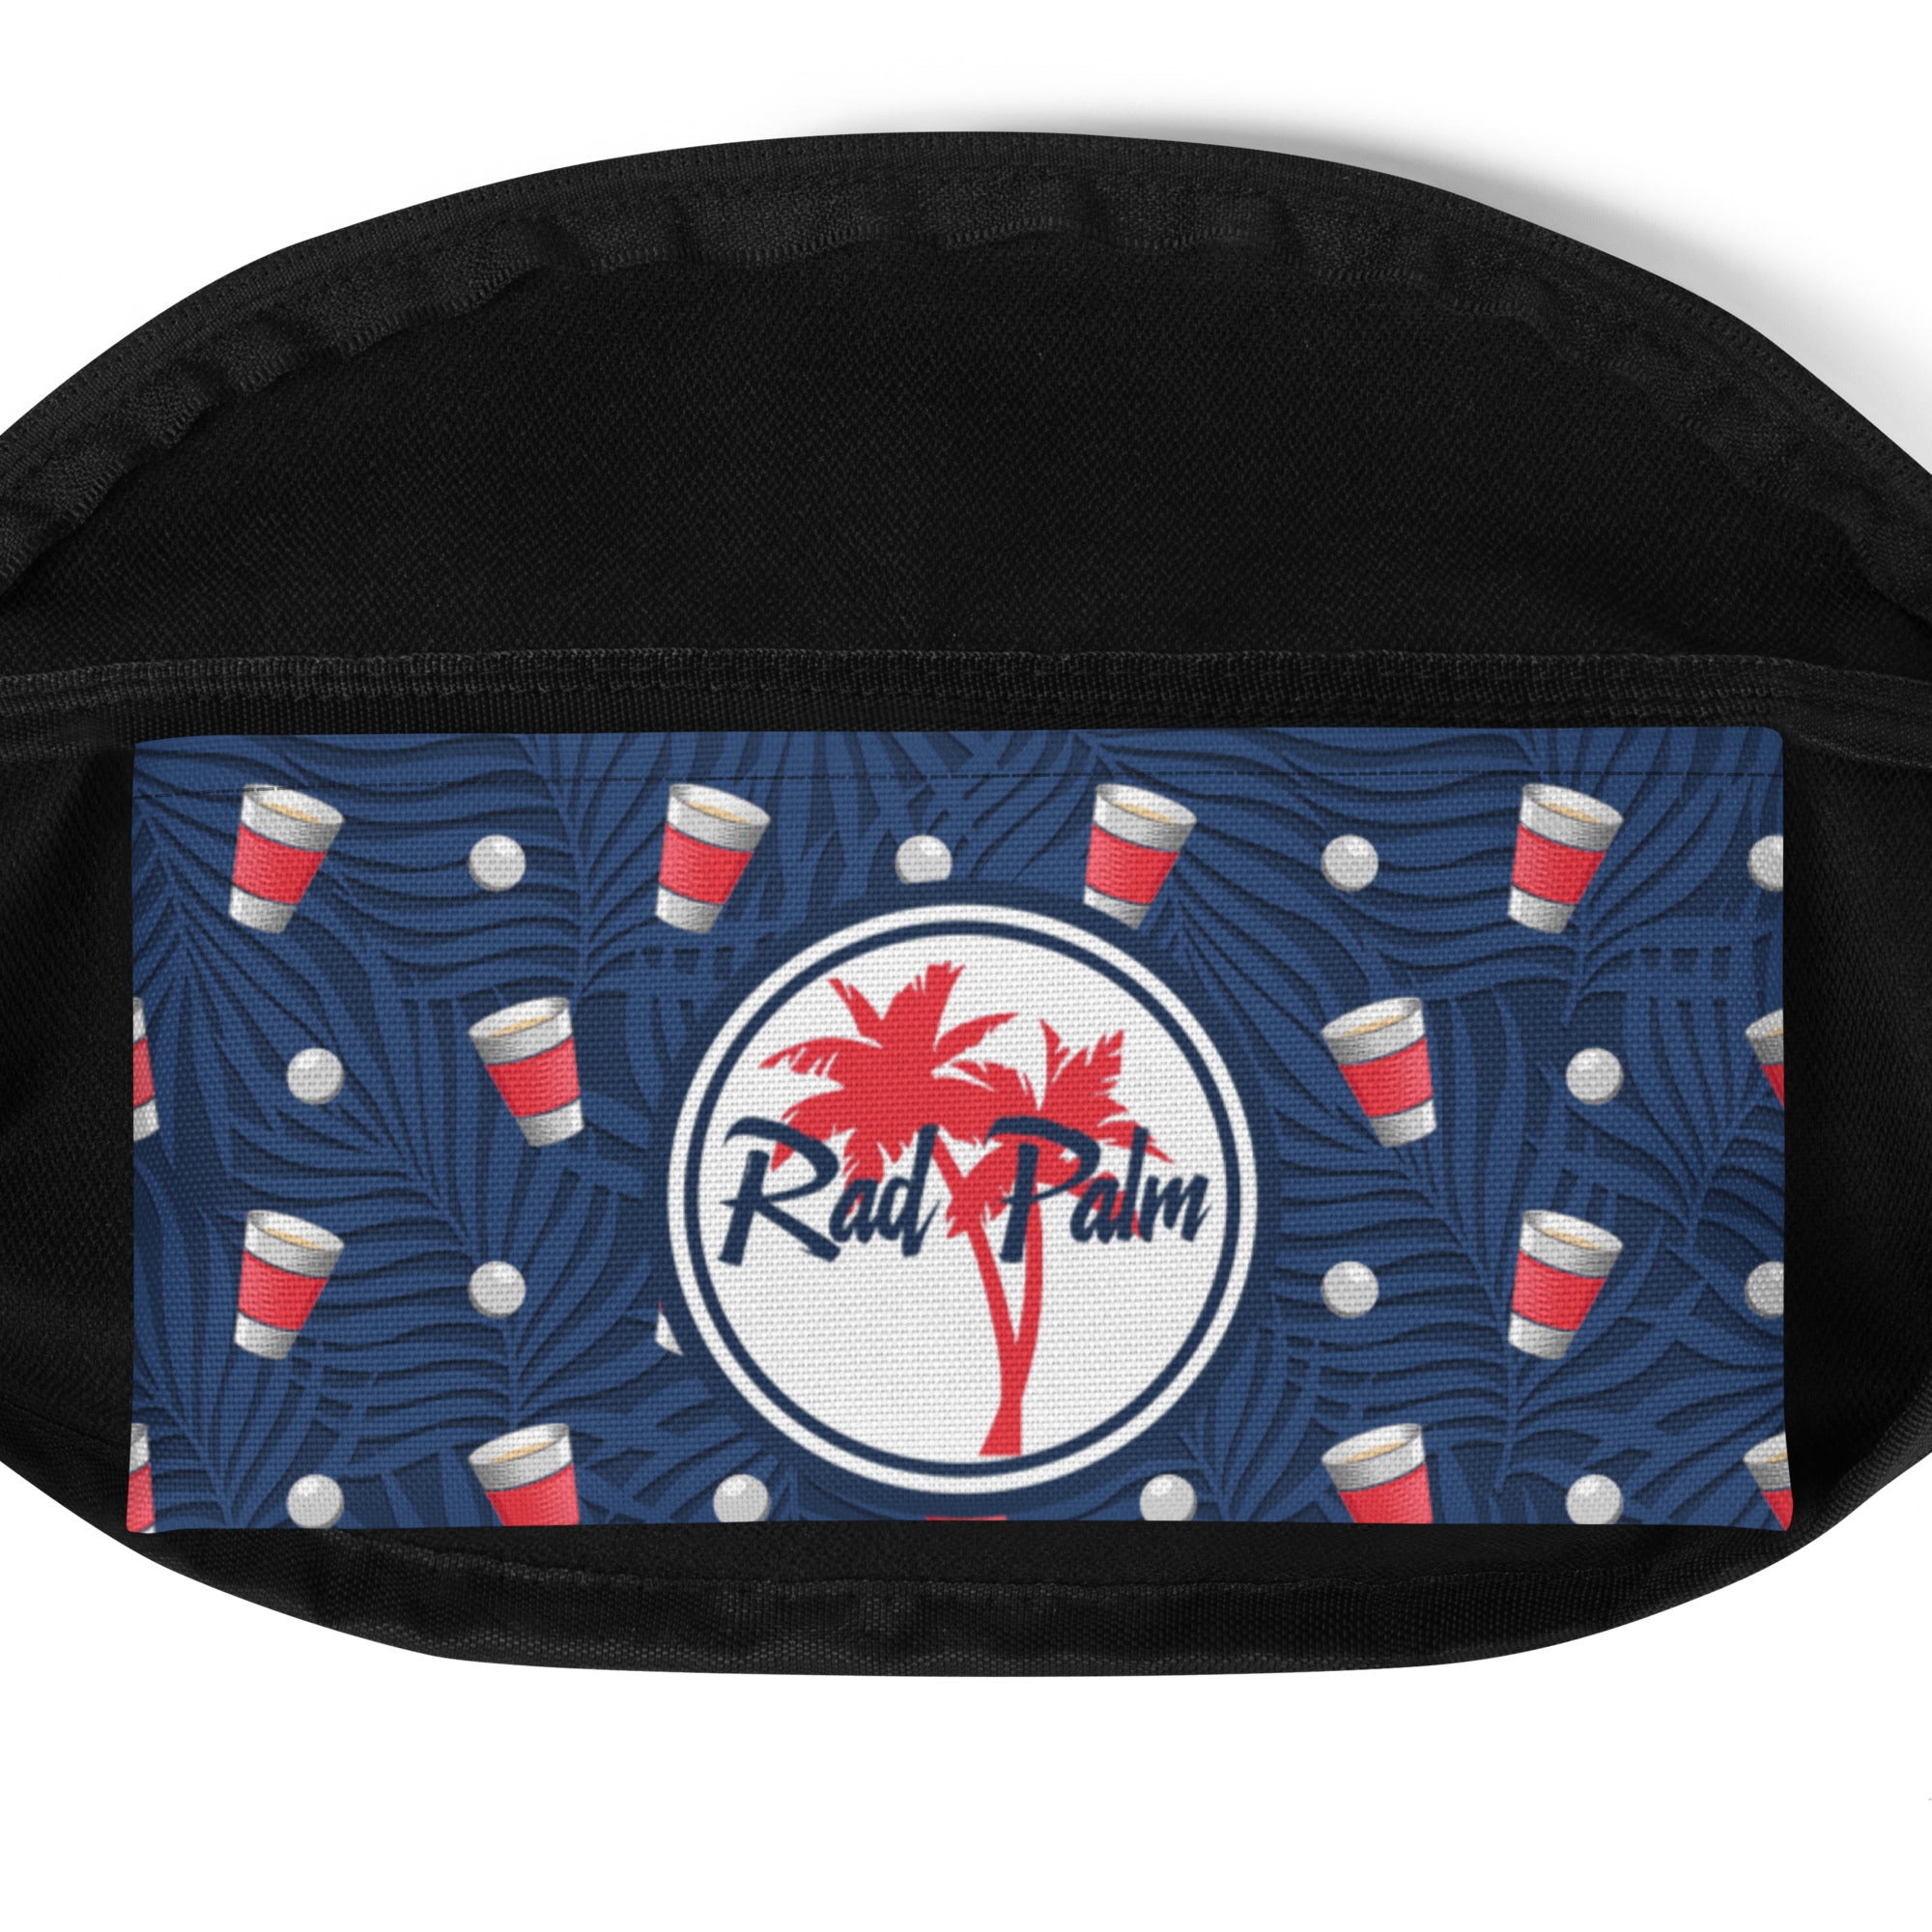 Rad Palm Beer Pong Champion Fanny Pack